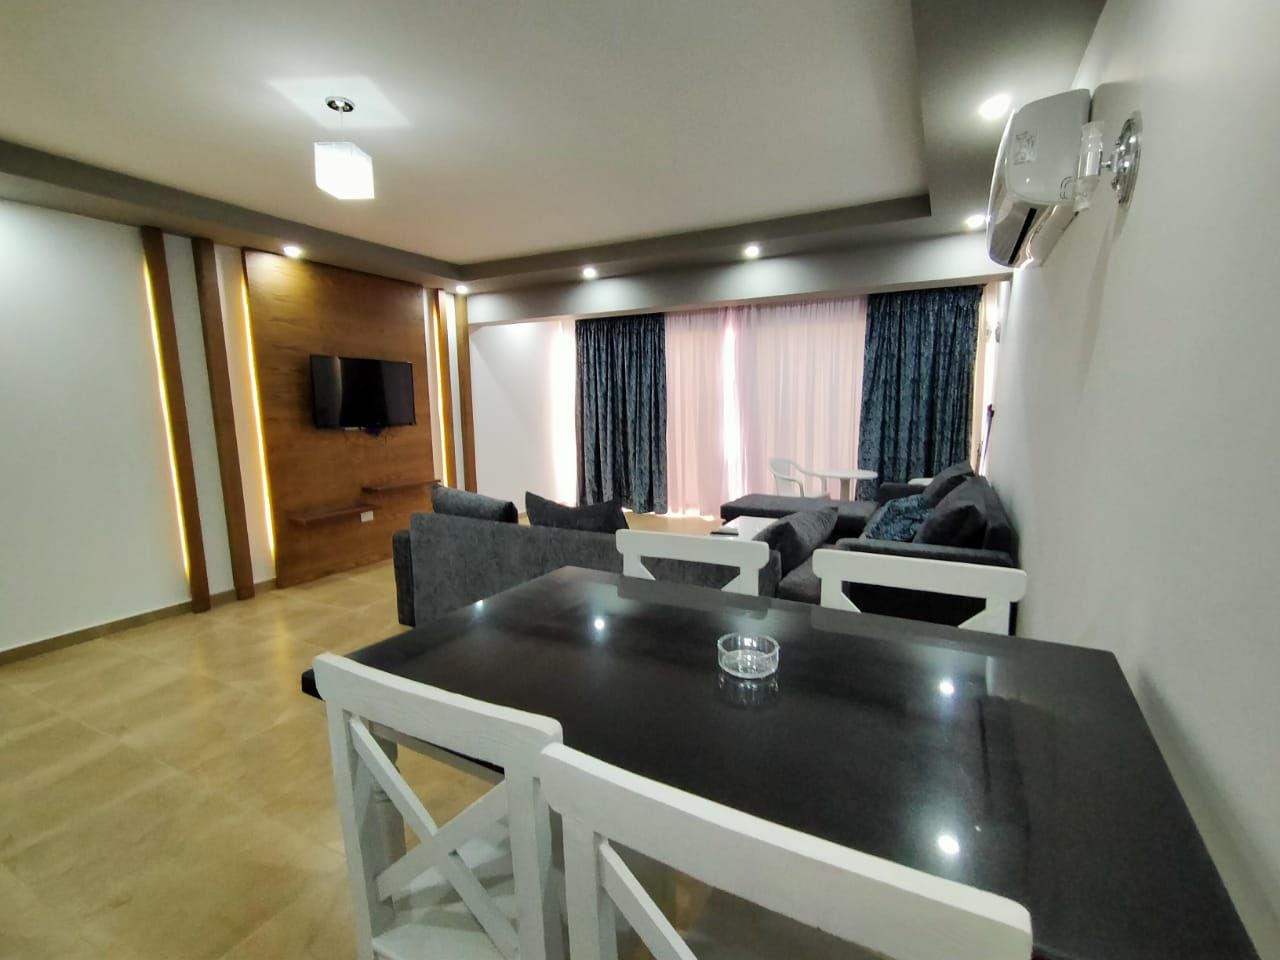 Beach front 2 bedrooms apartment 130m2 Ground floor with Sea & Pool view with large terrace -  PT-007 - 2.730.000 egp